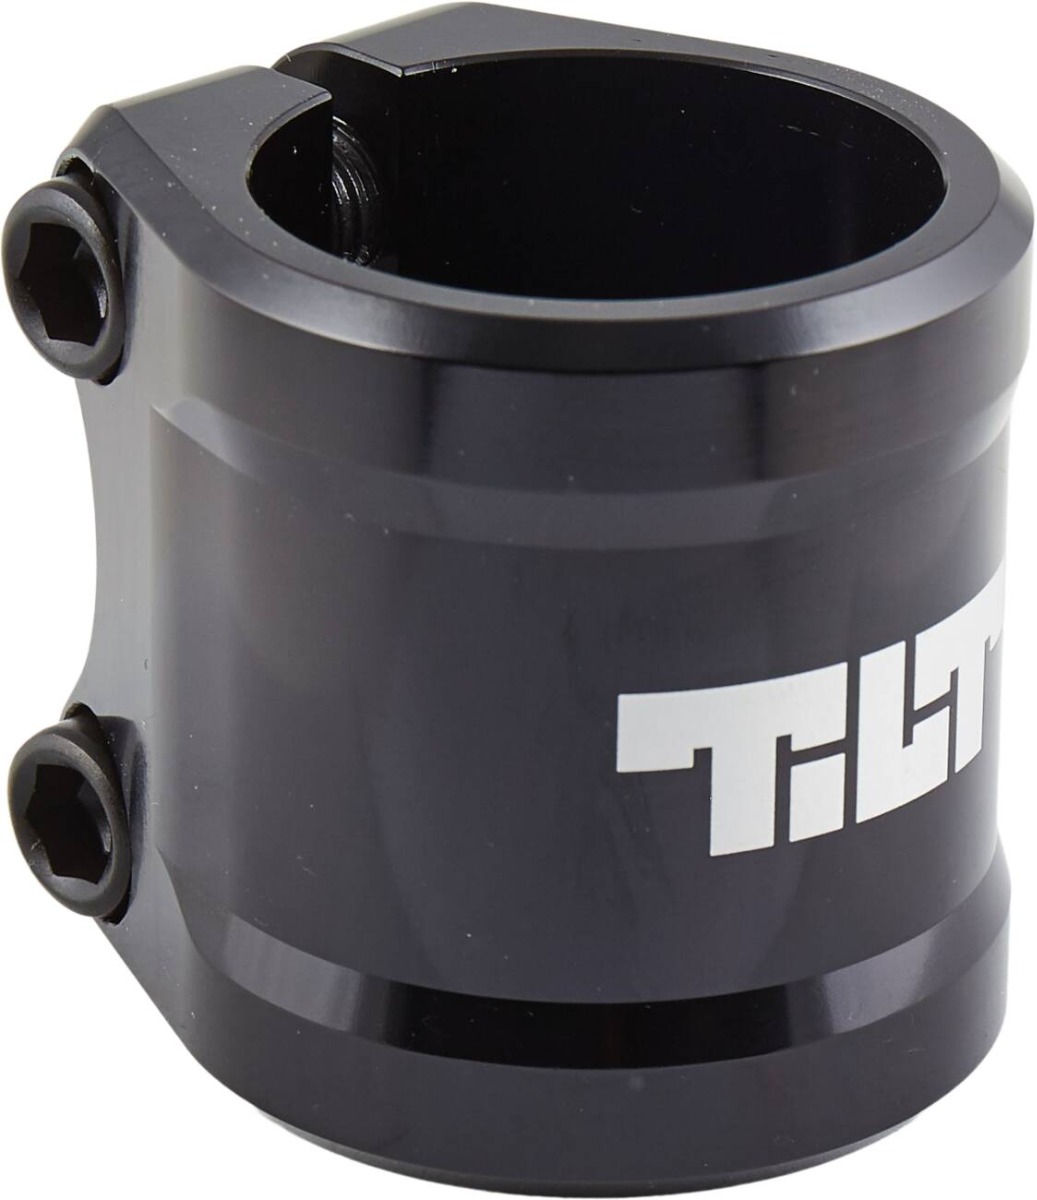 An image of Tilt ARC Oversized Double Scooter Clamp - Black